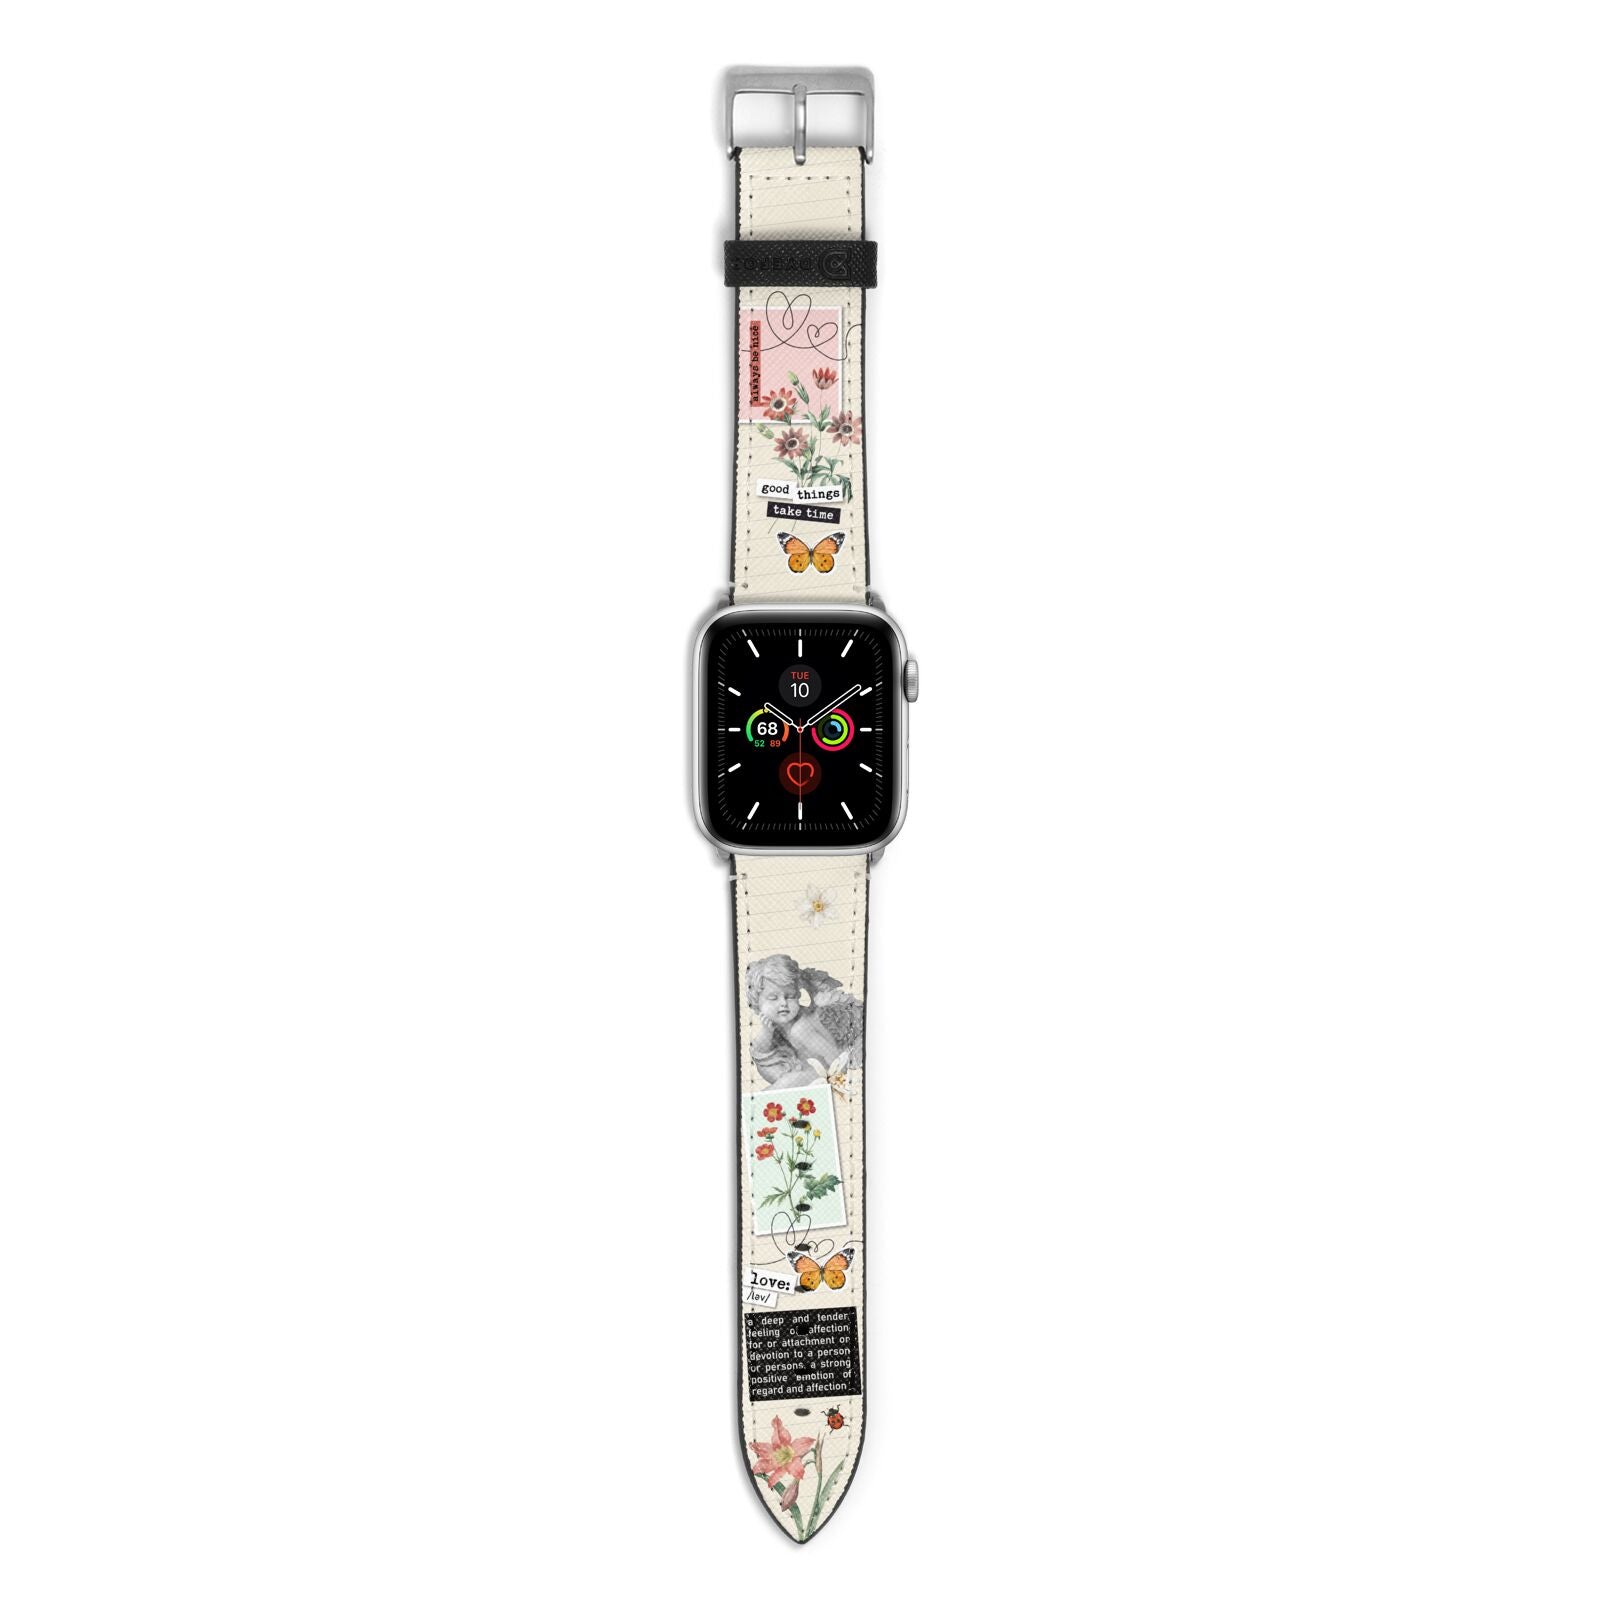 Vintage Love Collage Apple Watch Strap with Silver Hardware